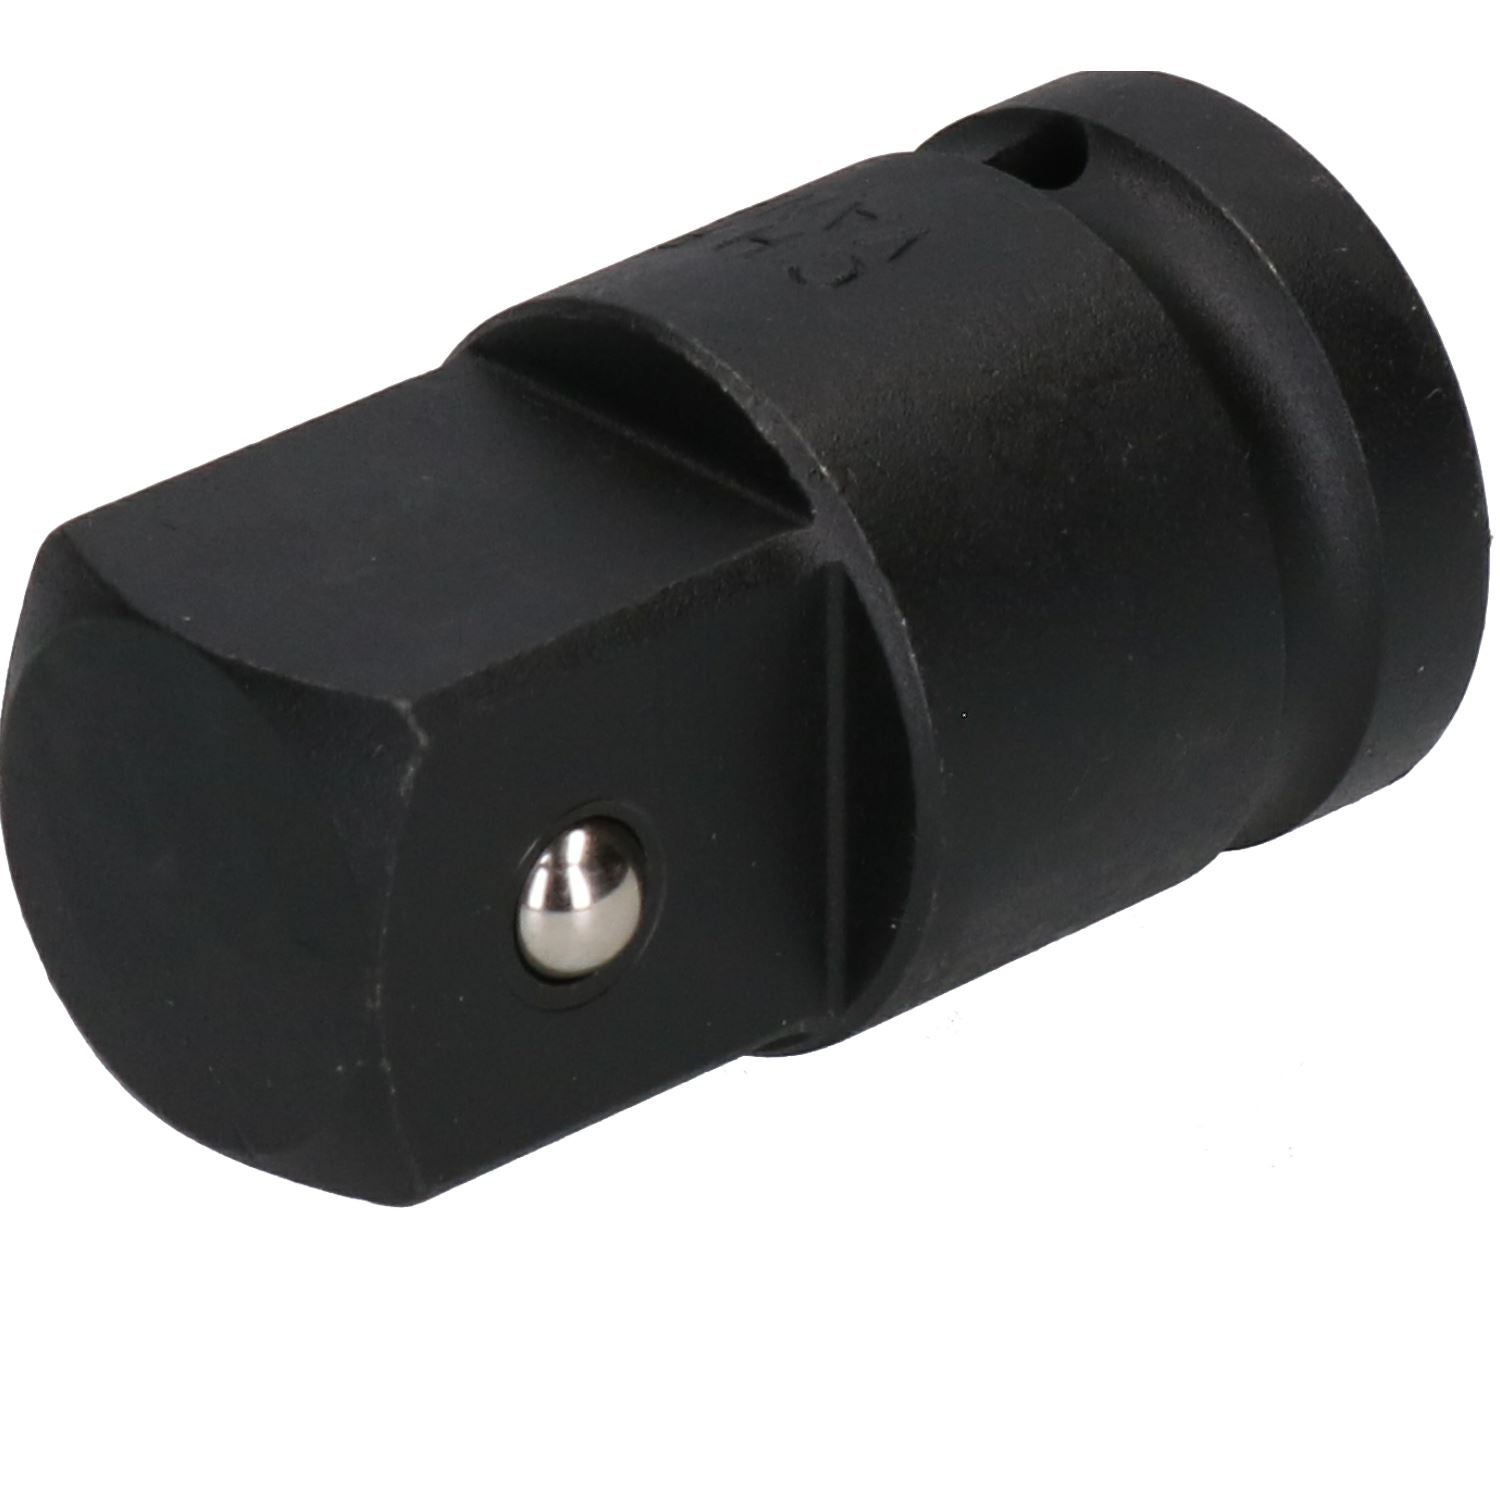 34mm Metric 3/4" or 1" Drive Deep Impact Socket 6 Sided With Step Up Adapter